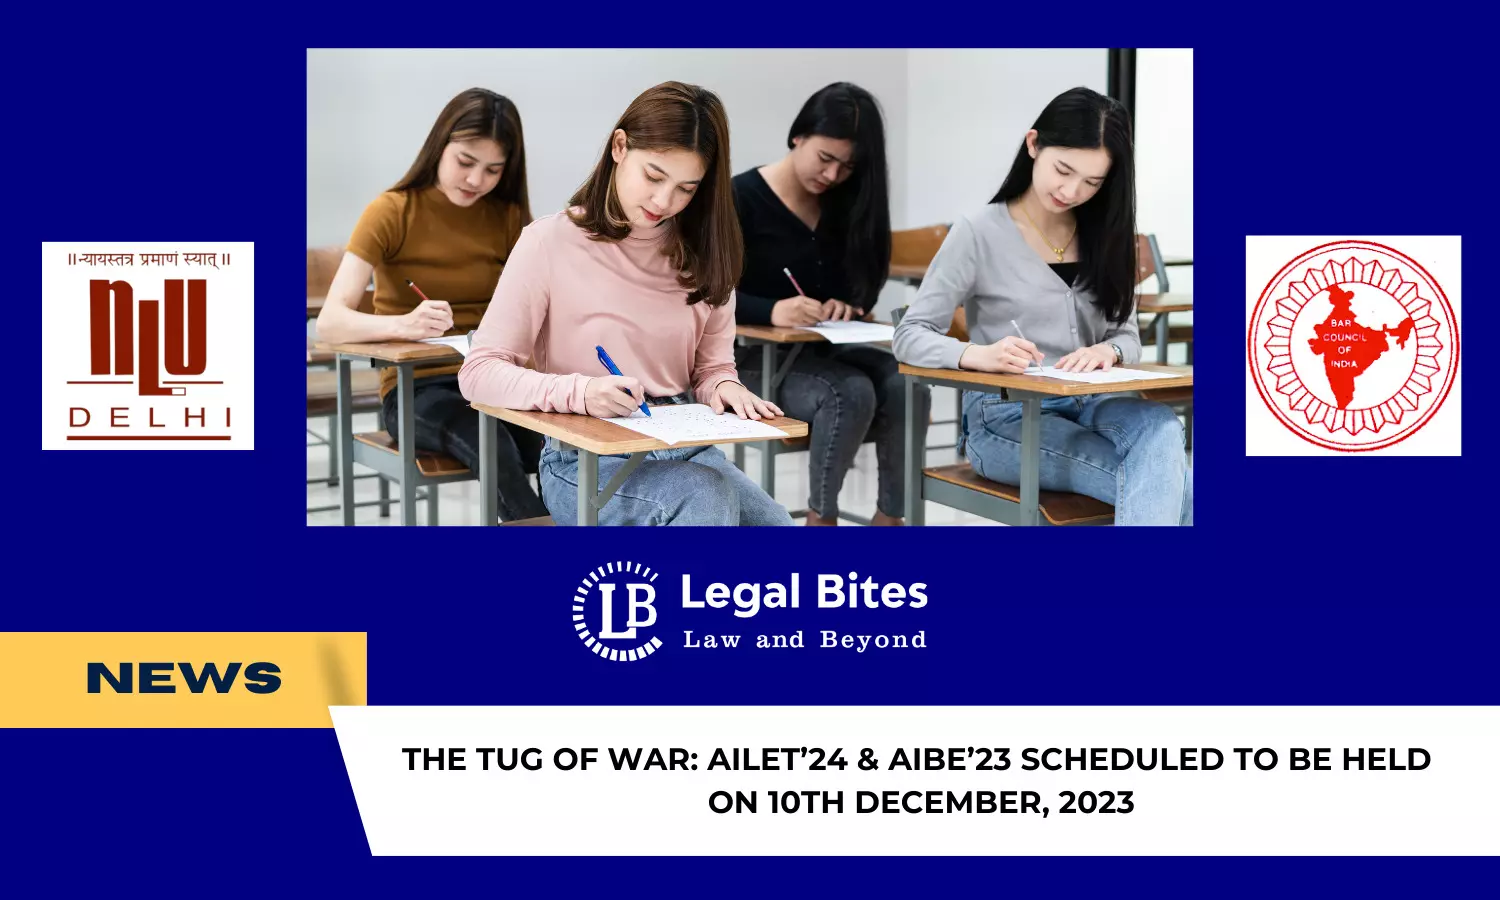 The Tug of War: AILET’24 & AIBE’23 scheduled to be held on 10th December, 2023